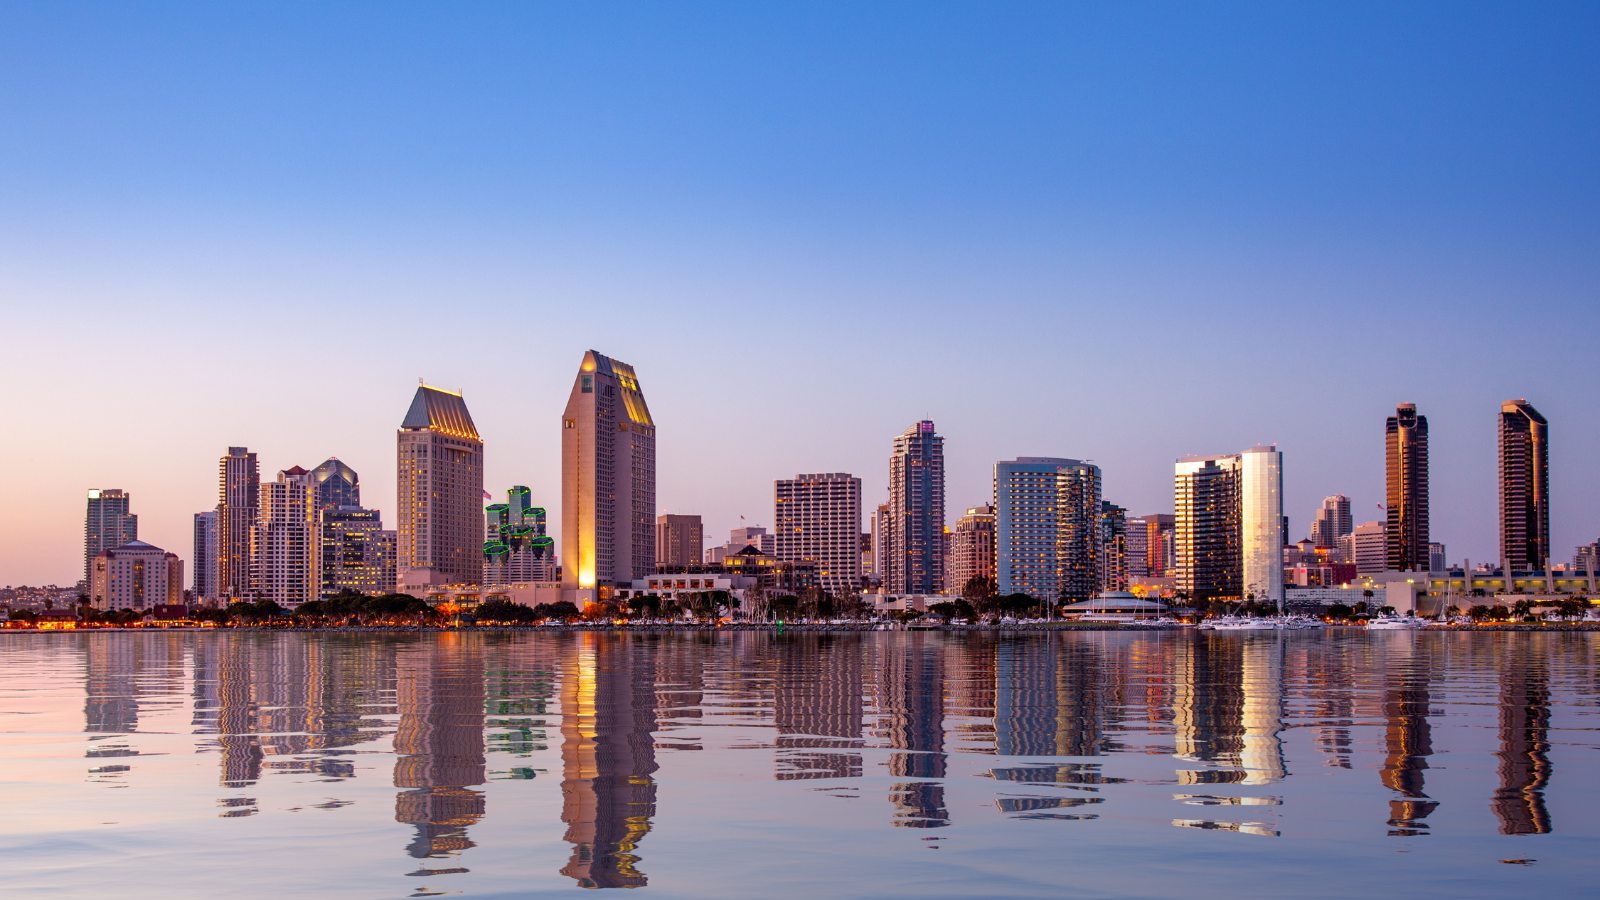 Startup Funding Options in
San Diego that Tech Entrepreneurs
Must Know